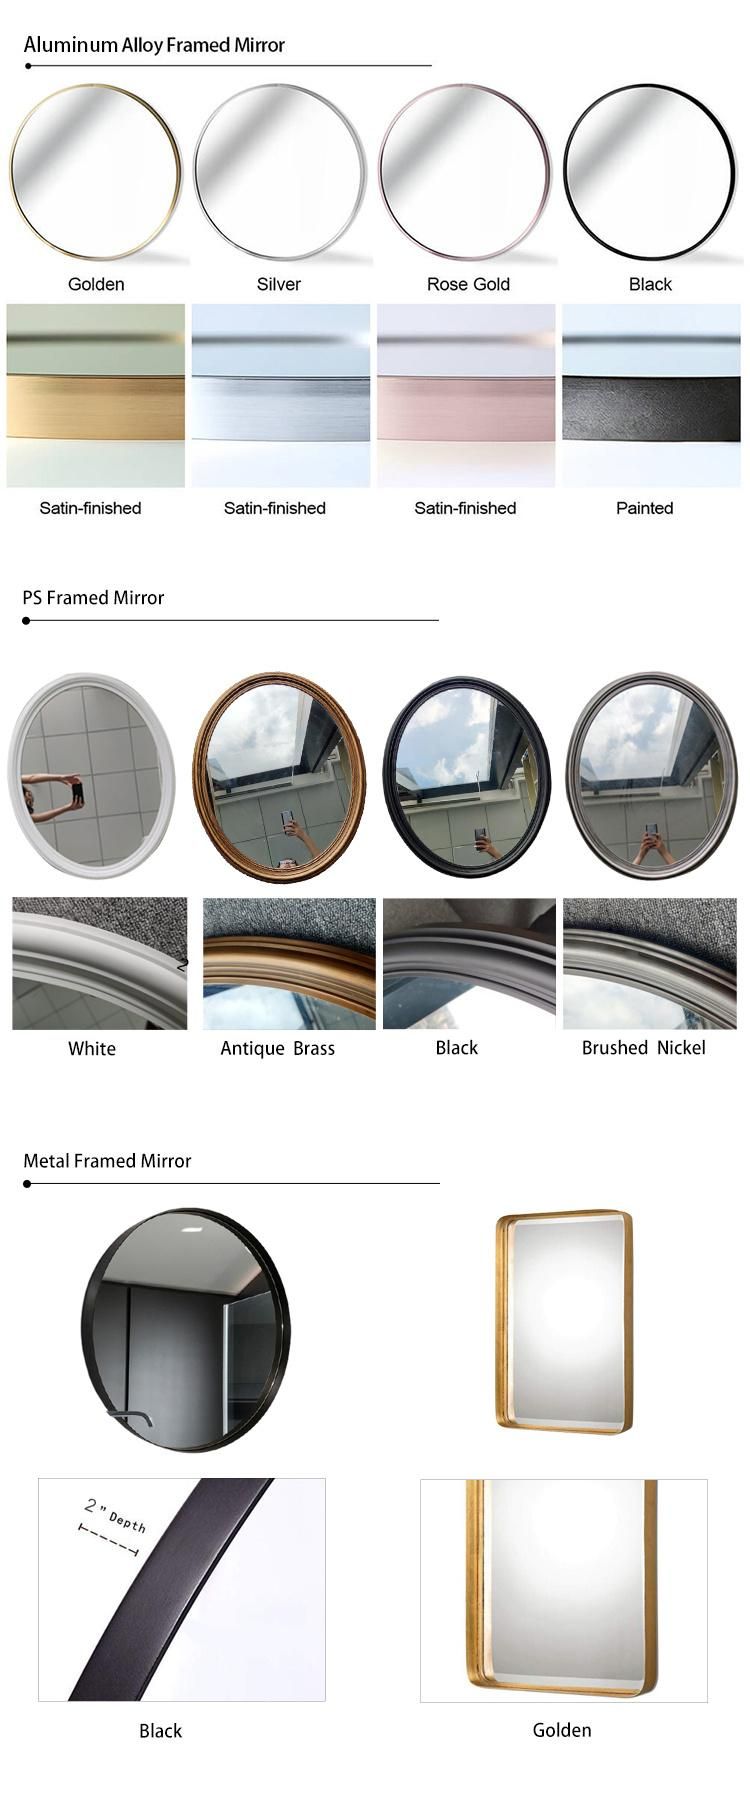 Made in China Decorative Full Length Stand Mirror for Bedroom